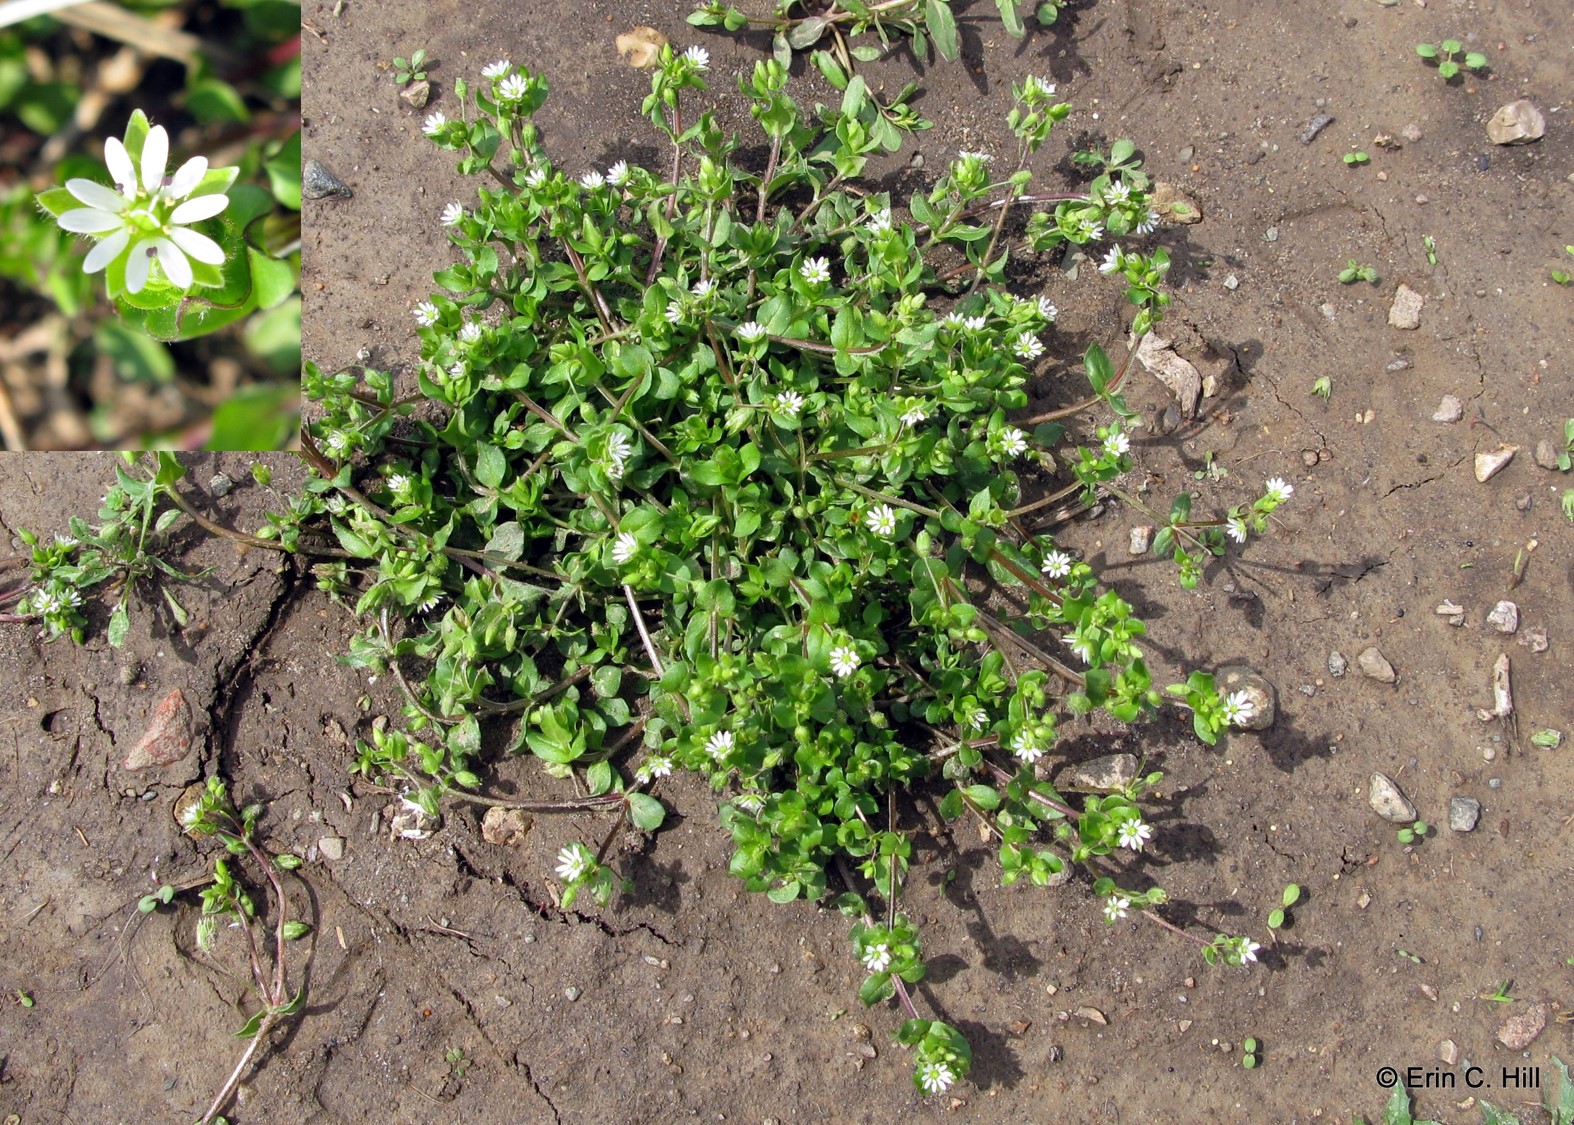 Common Lawn Weeds Chickweed